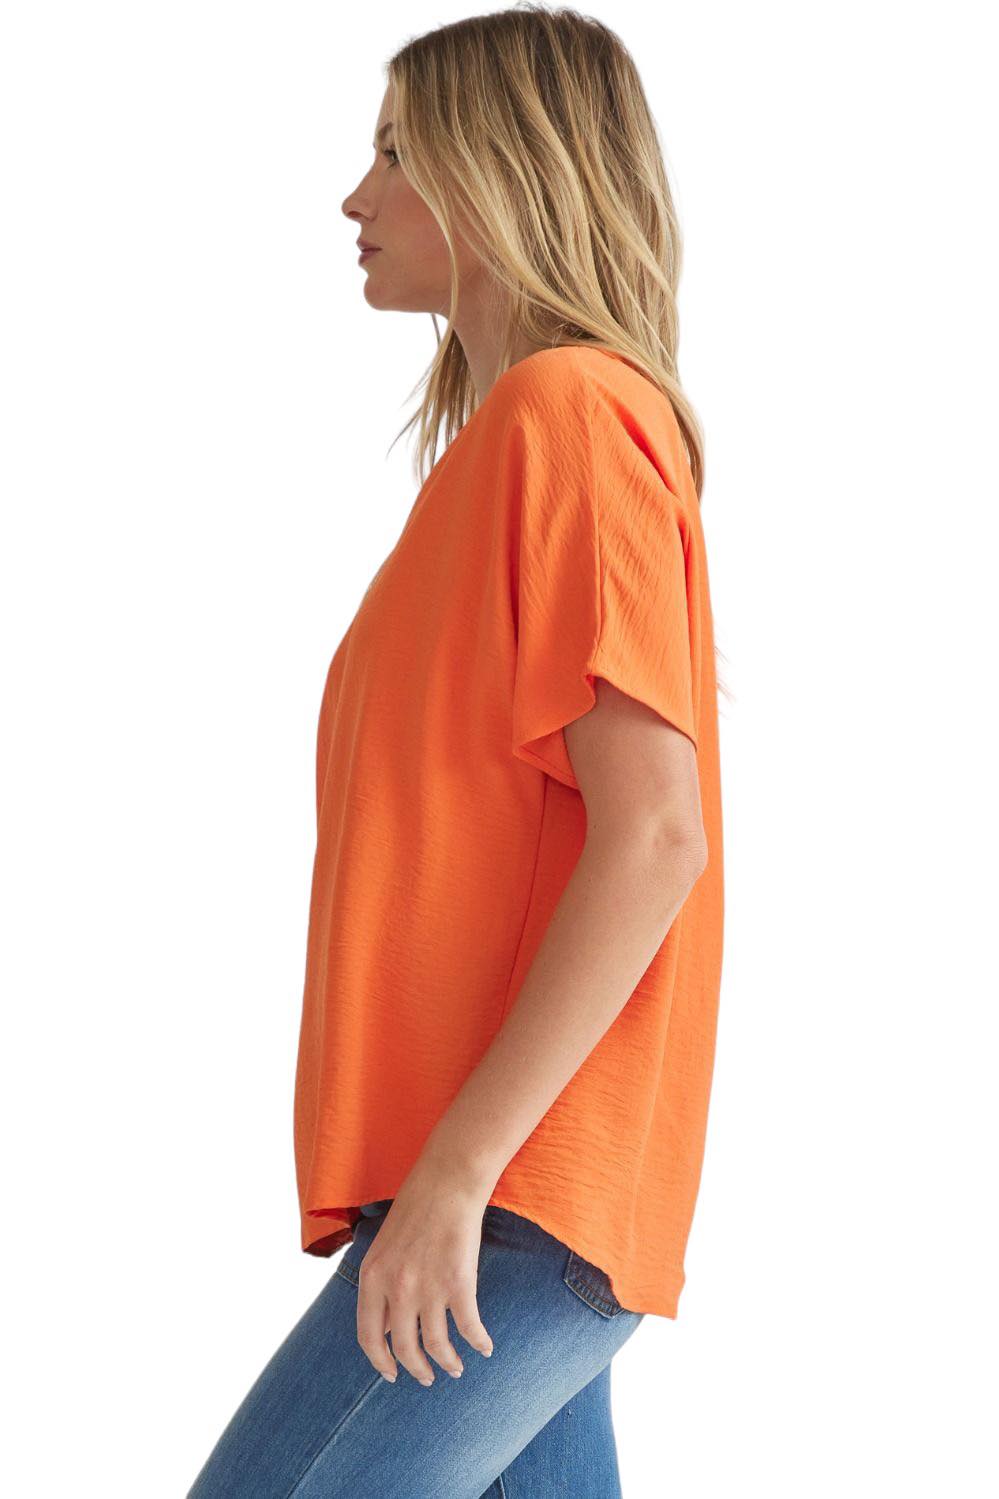 Orange: Just Me And You Top